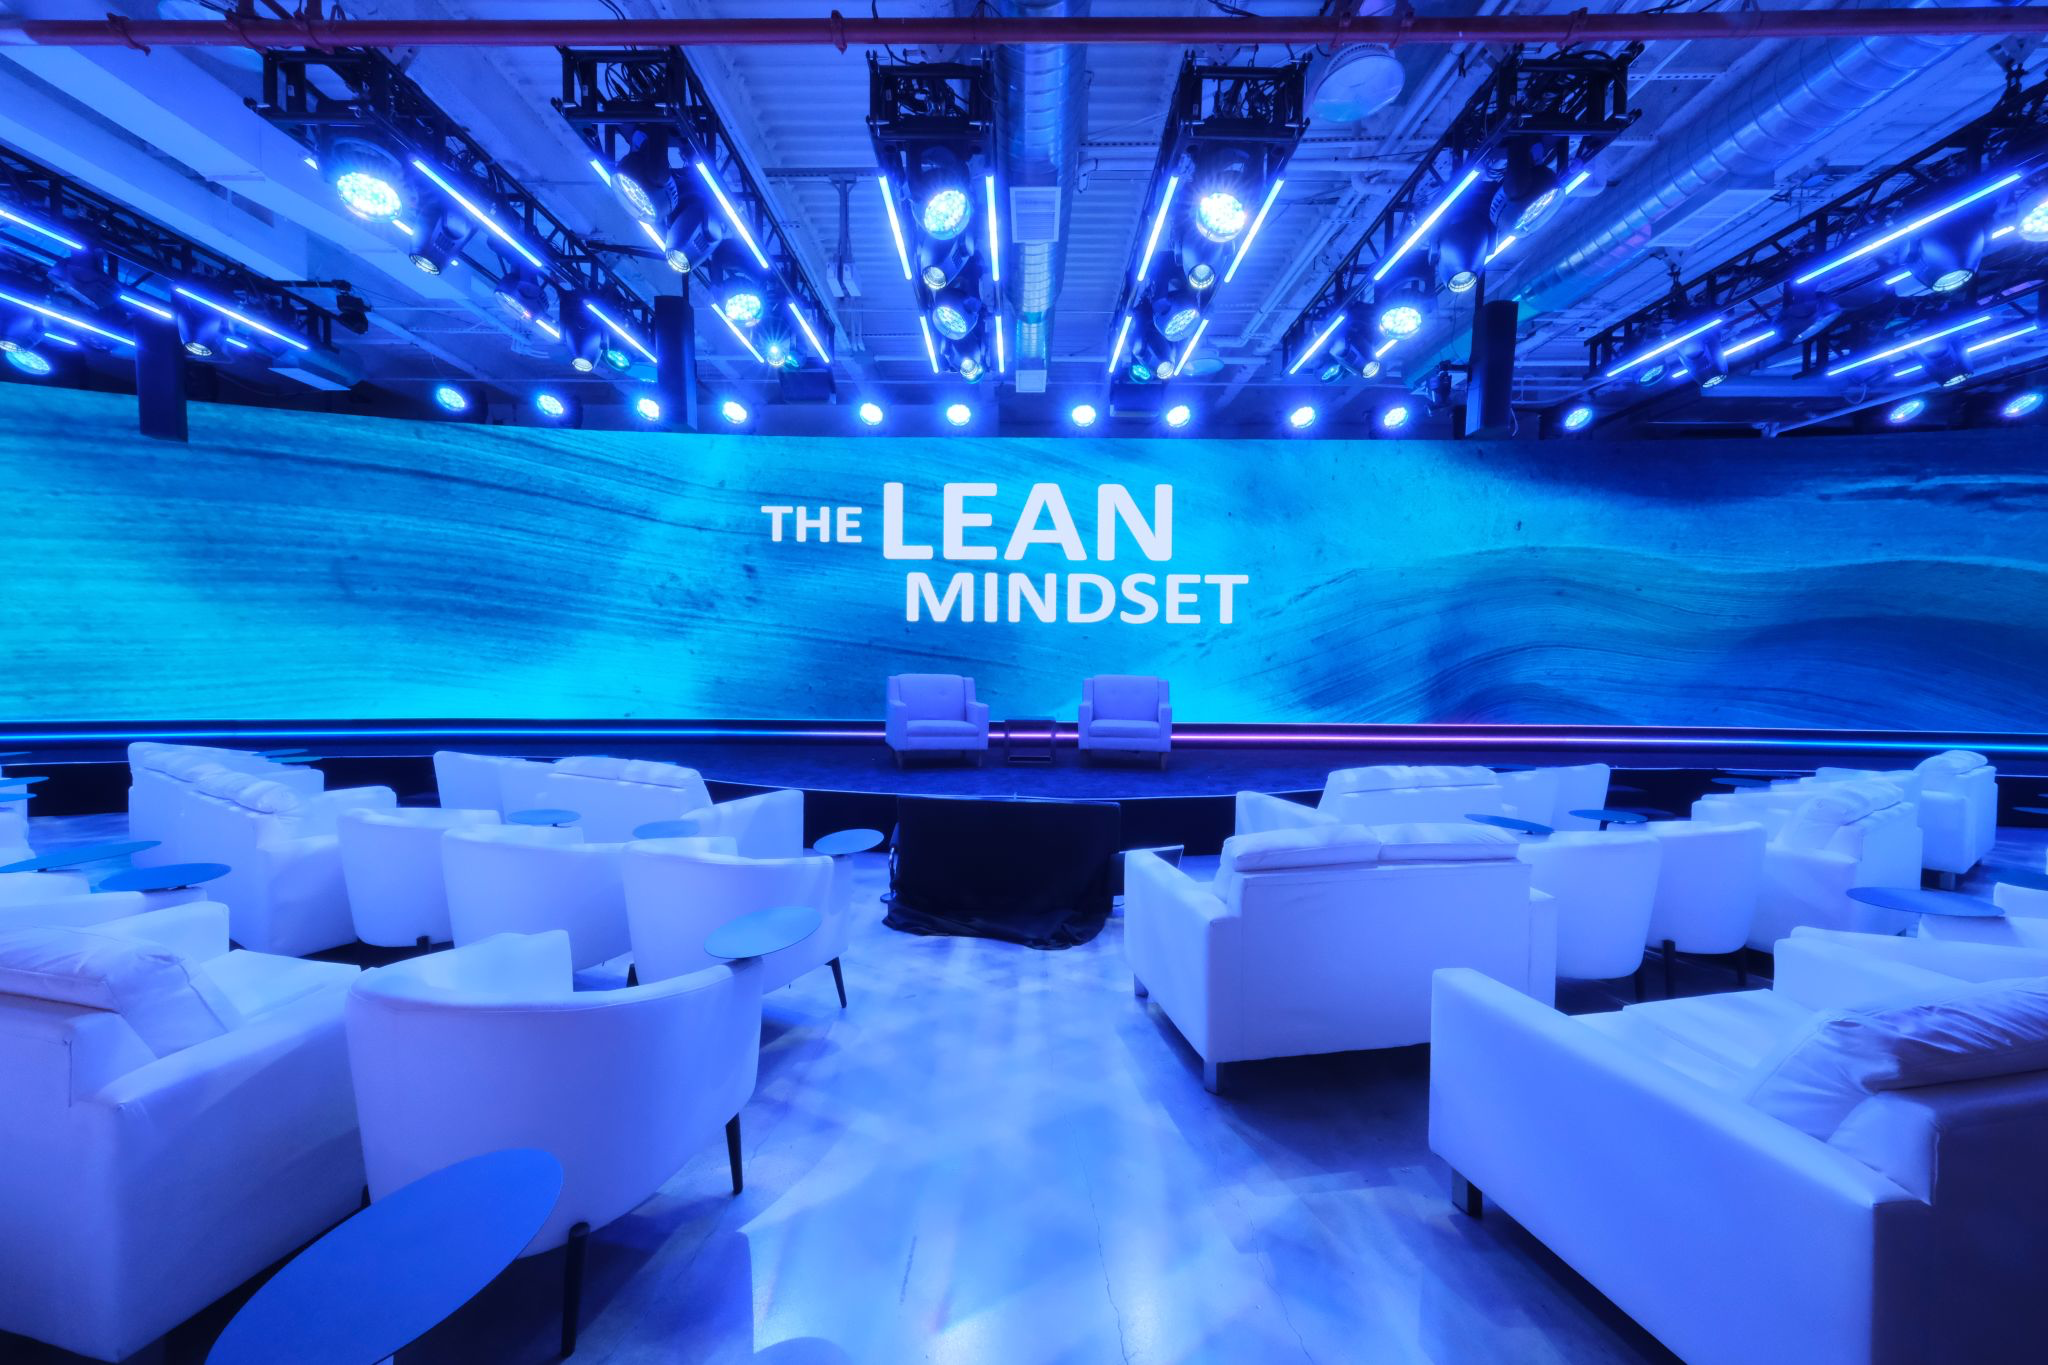 GE's "The Lean Mindset" event